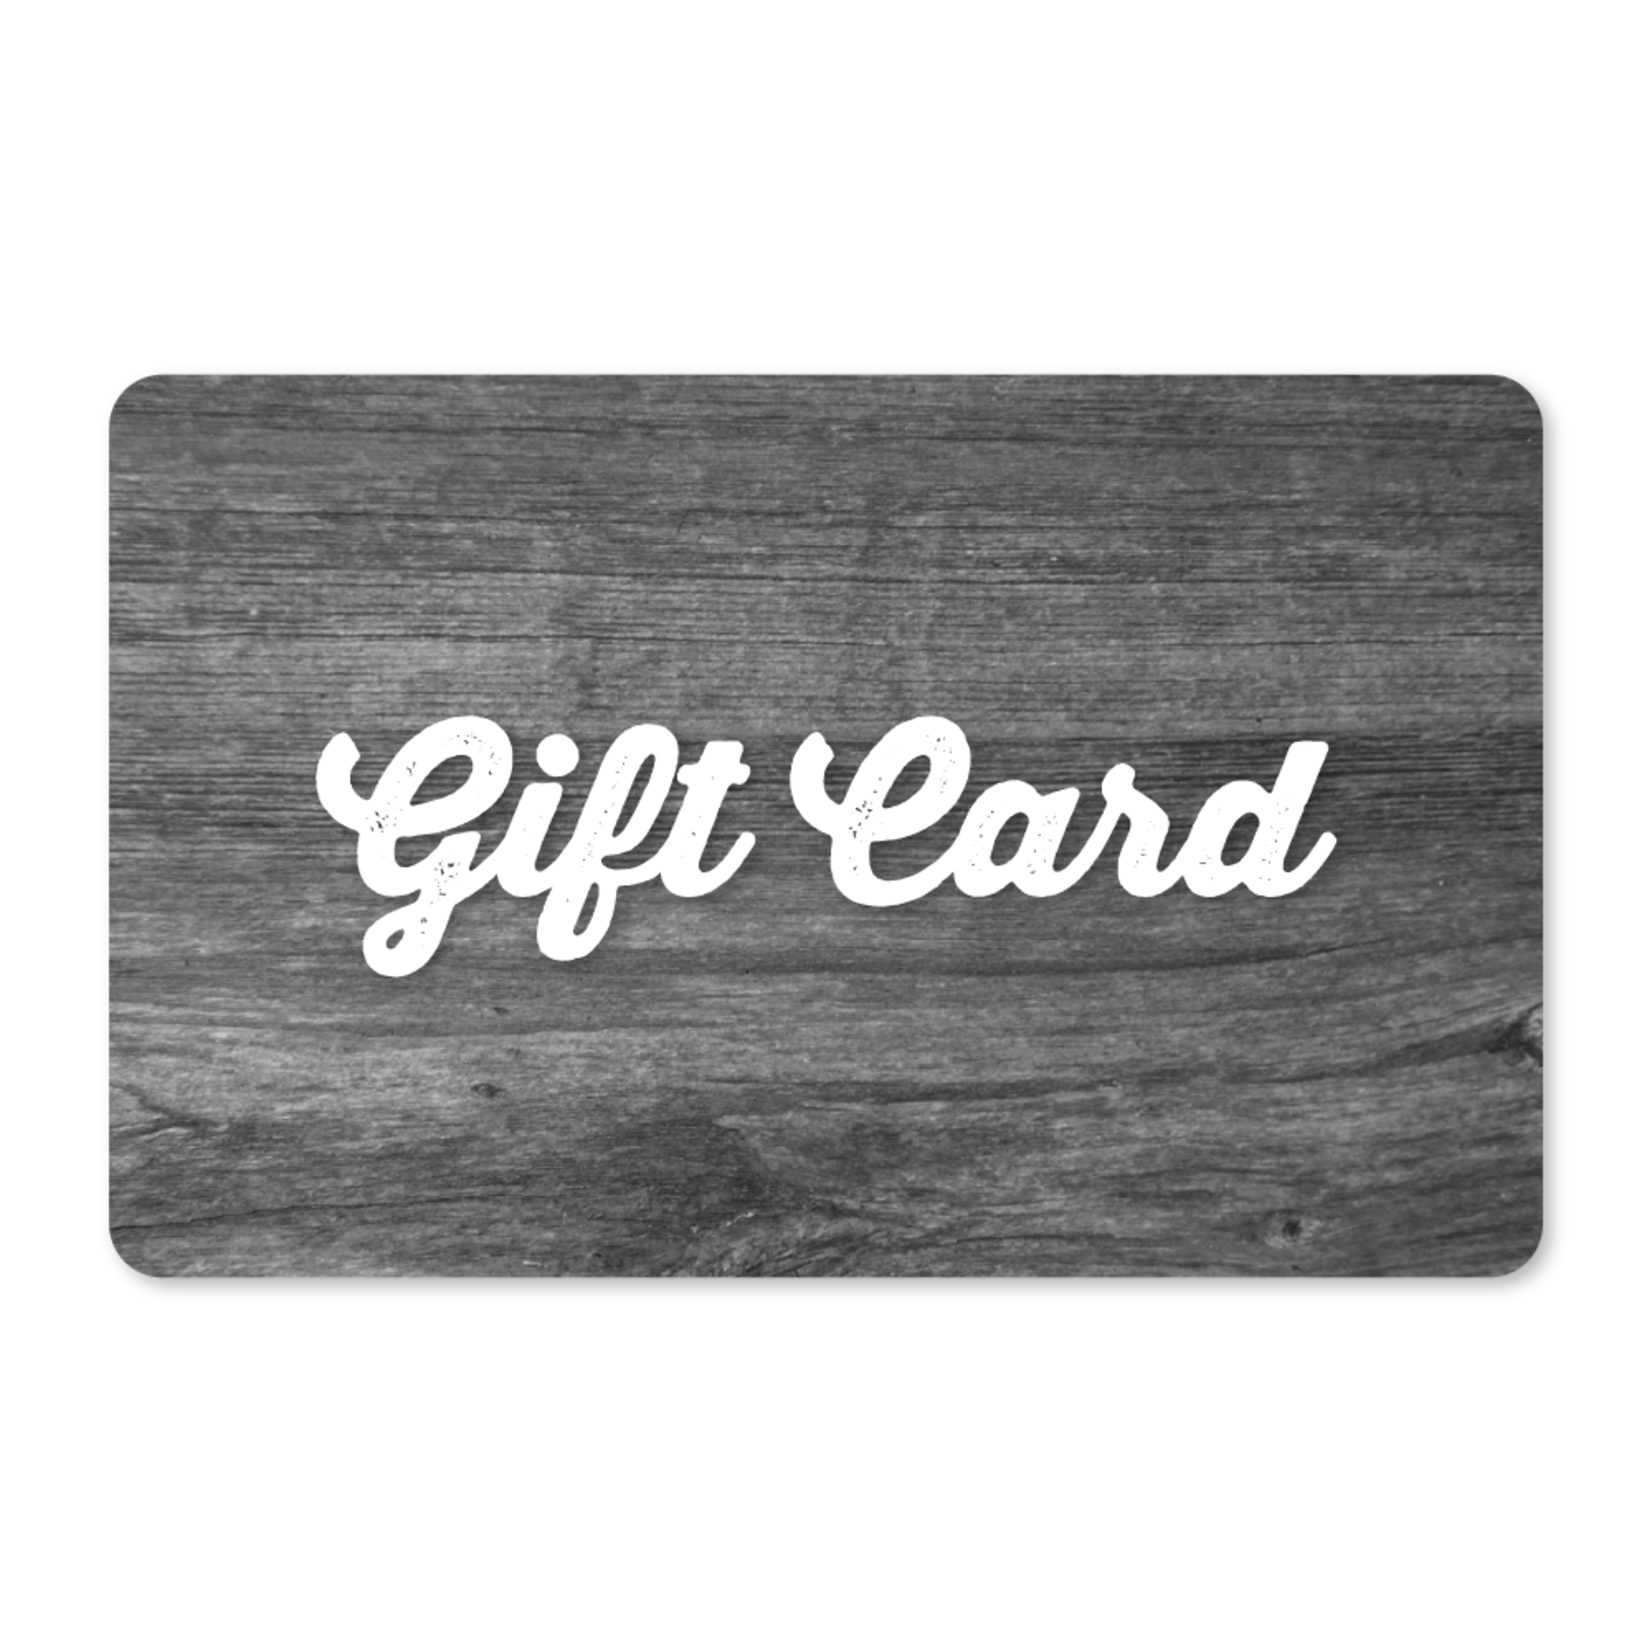 Gift Cards for Lightspeed - Plastic Printers